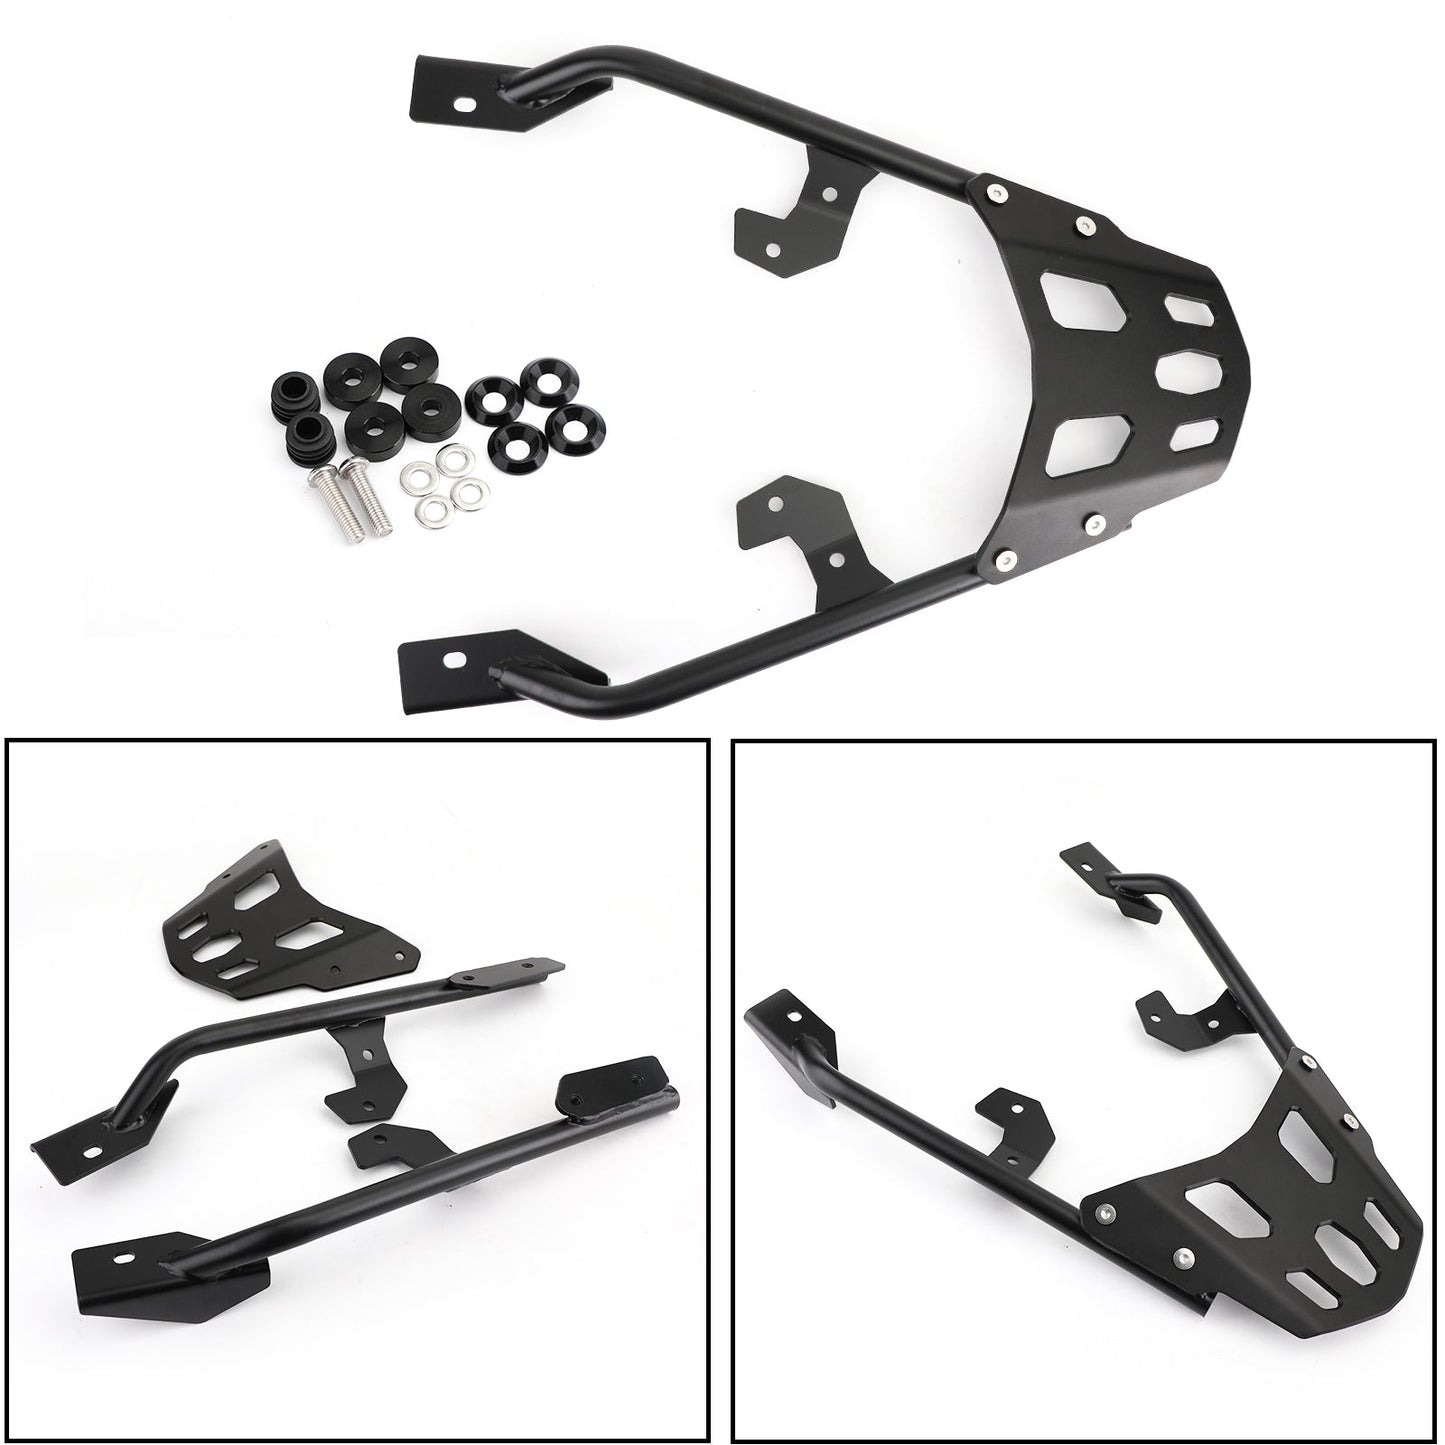 Rear Top Case Carrier Luggage Rack Fit for Honda X-ADV 750 XADV 750 2016-2020